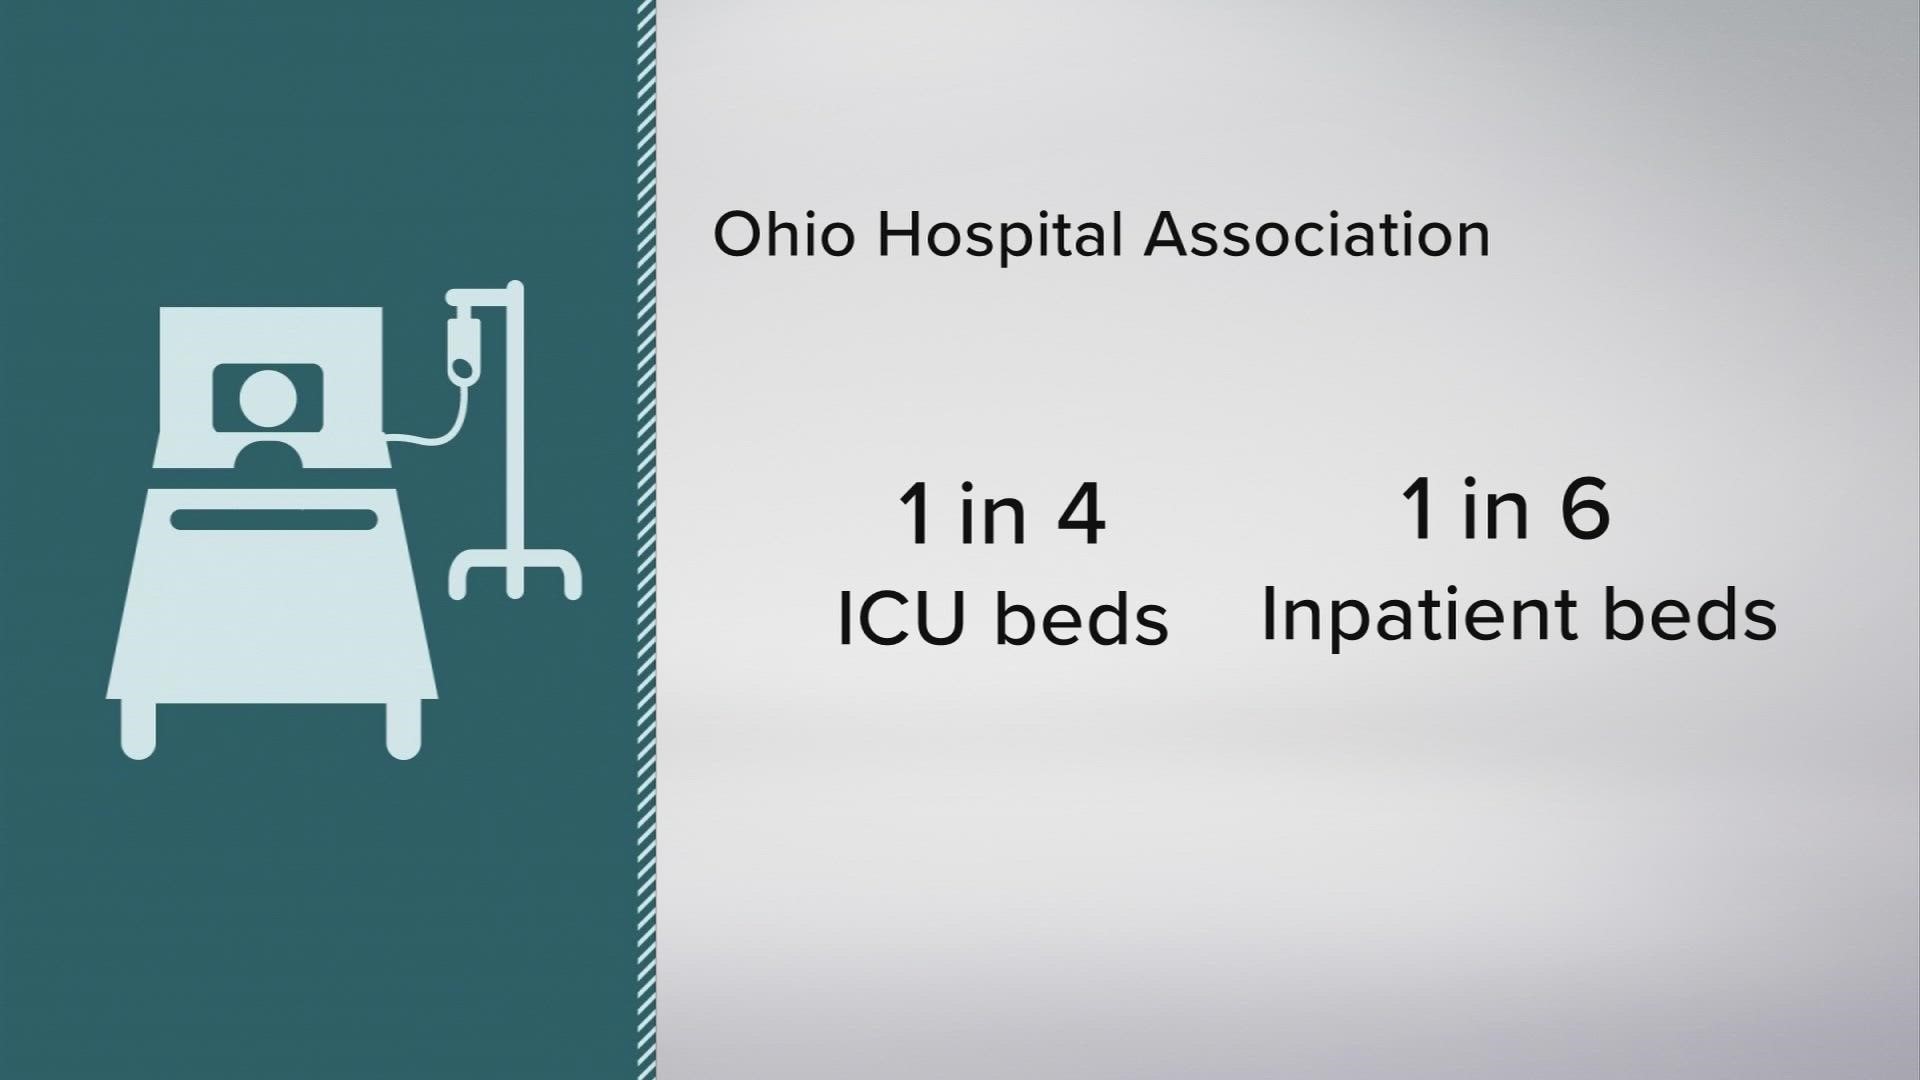 According to the Ohio Hospital Association, one in four ICU patients are COVID positive.